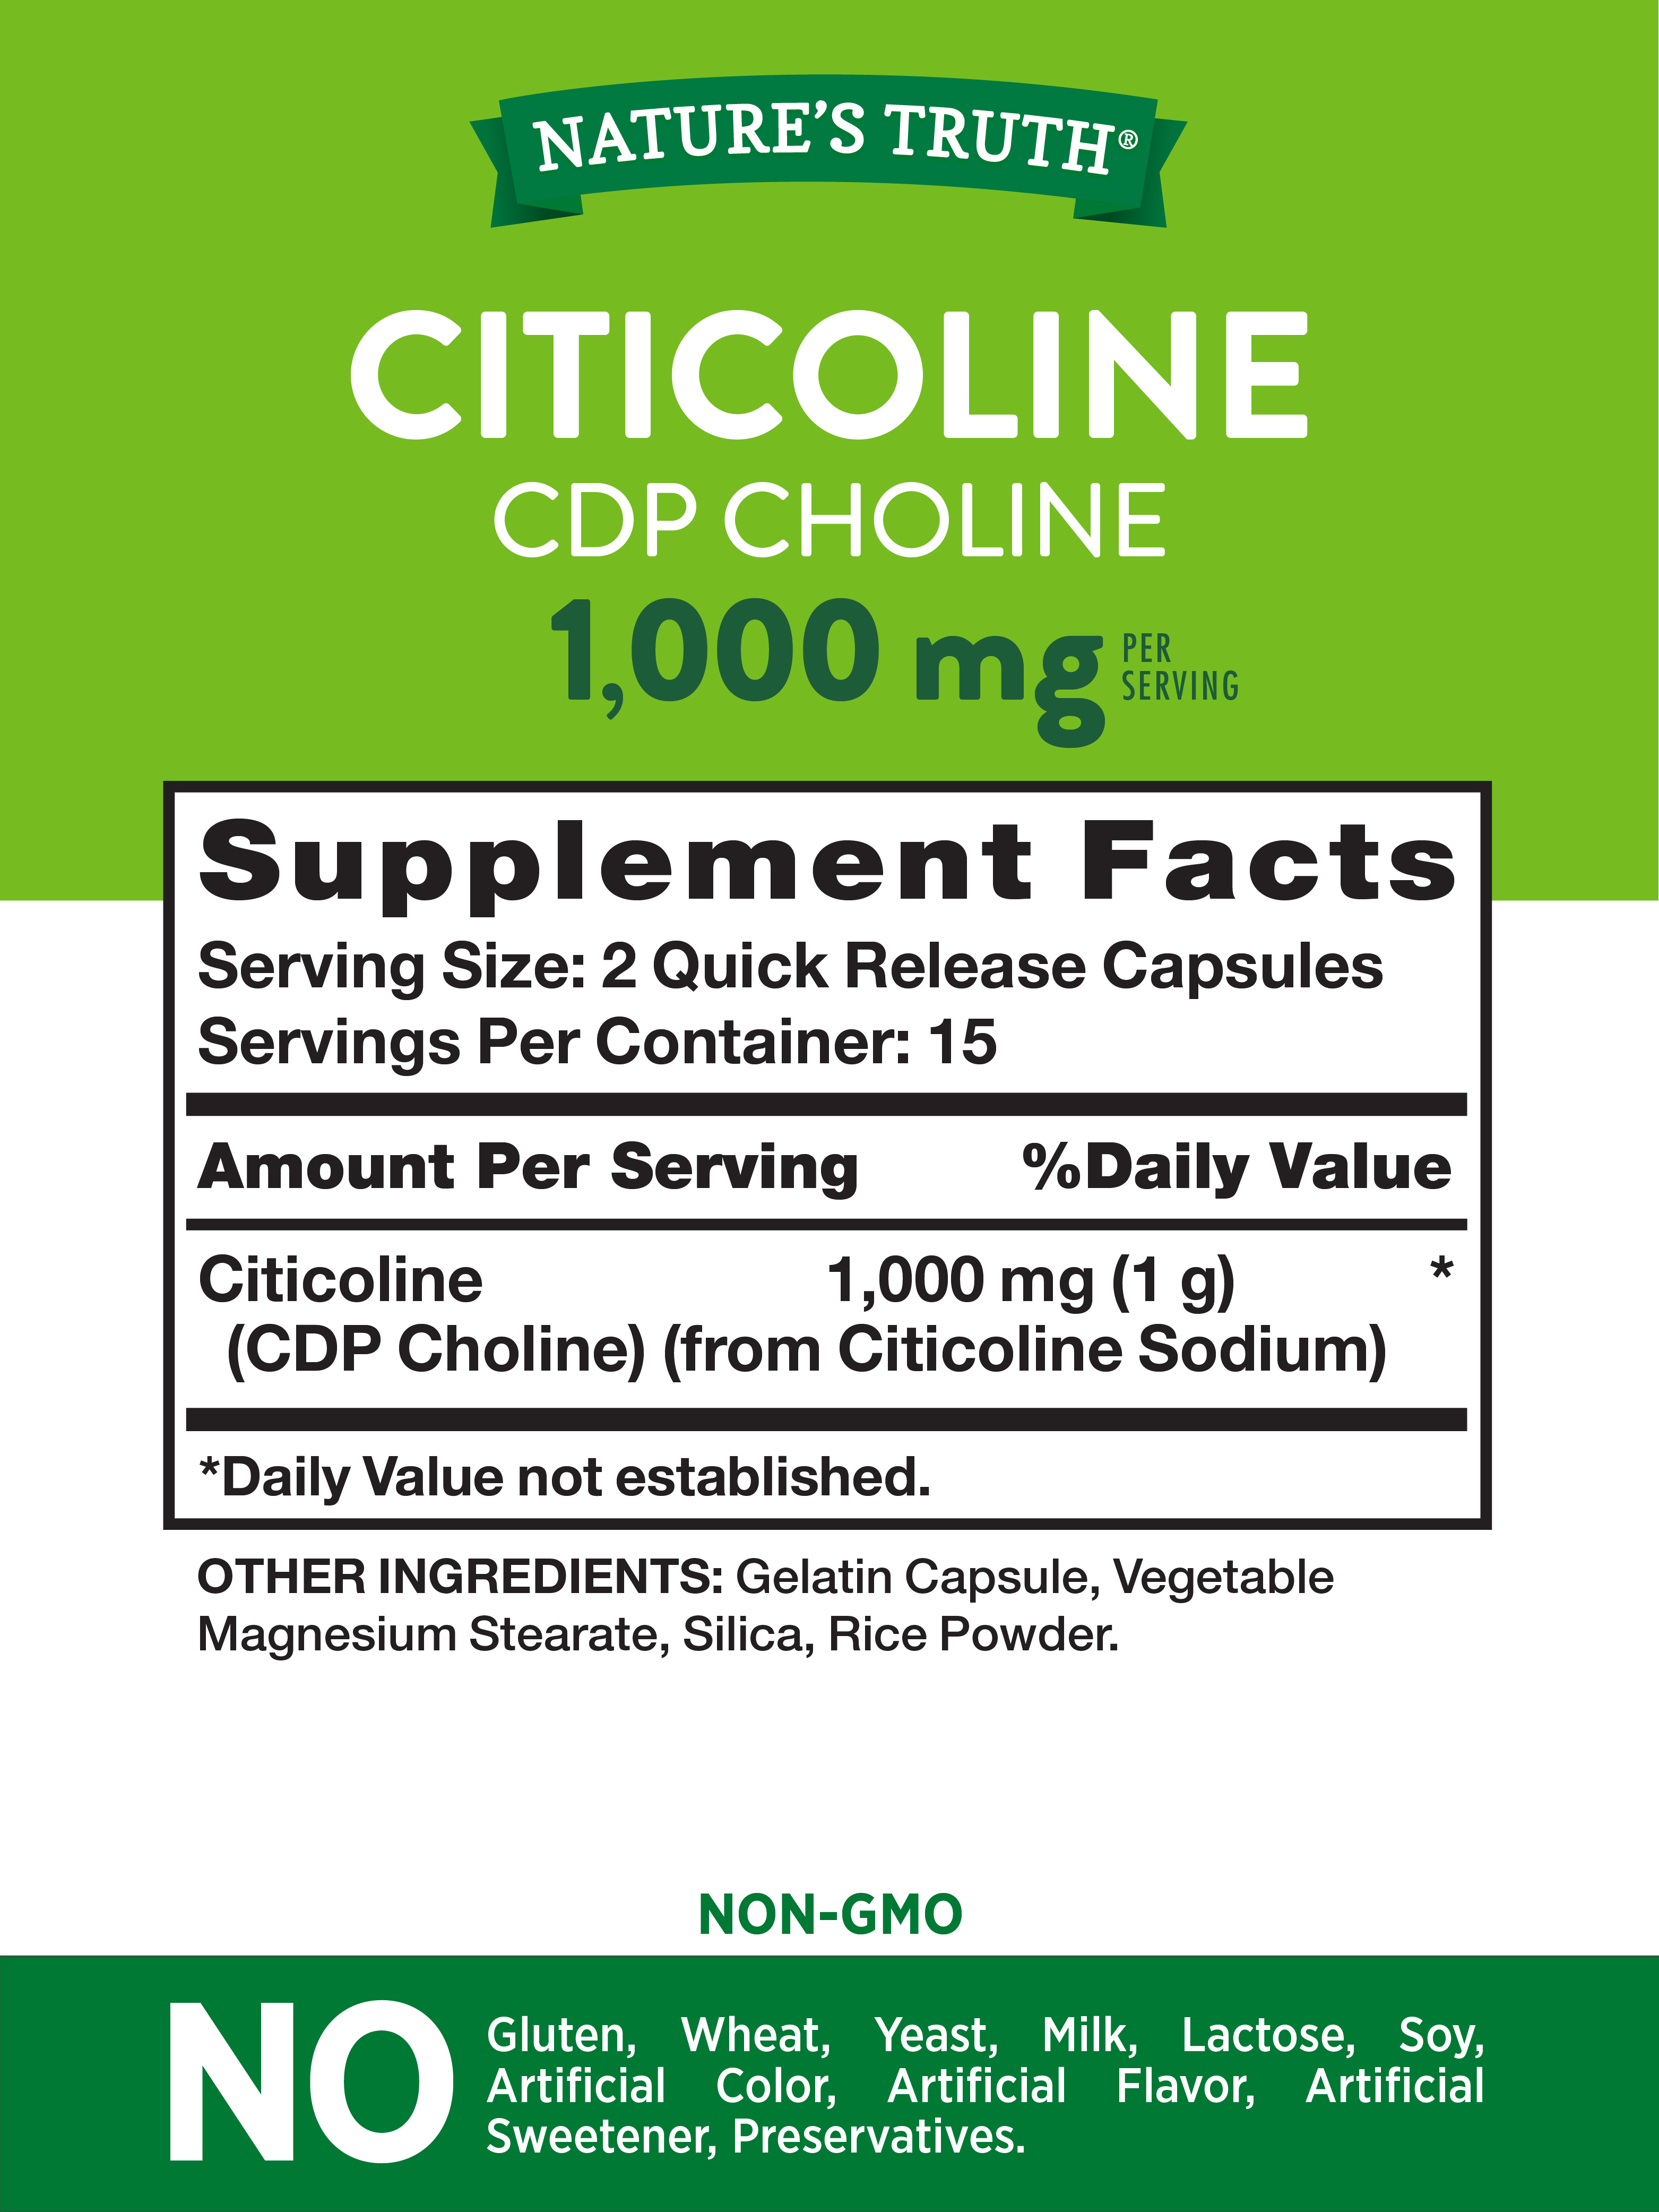 Citicoline 1000mg | 30 Capsules | CDP Choline | Non-GMO & Gluten Free Supplement | by Nature's Truth - image 5 of 6